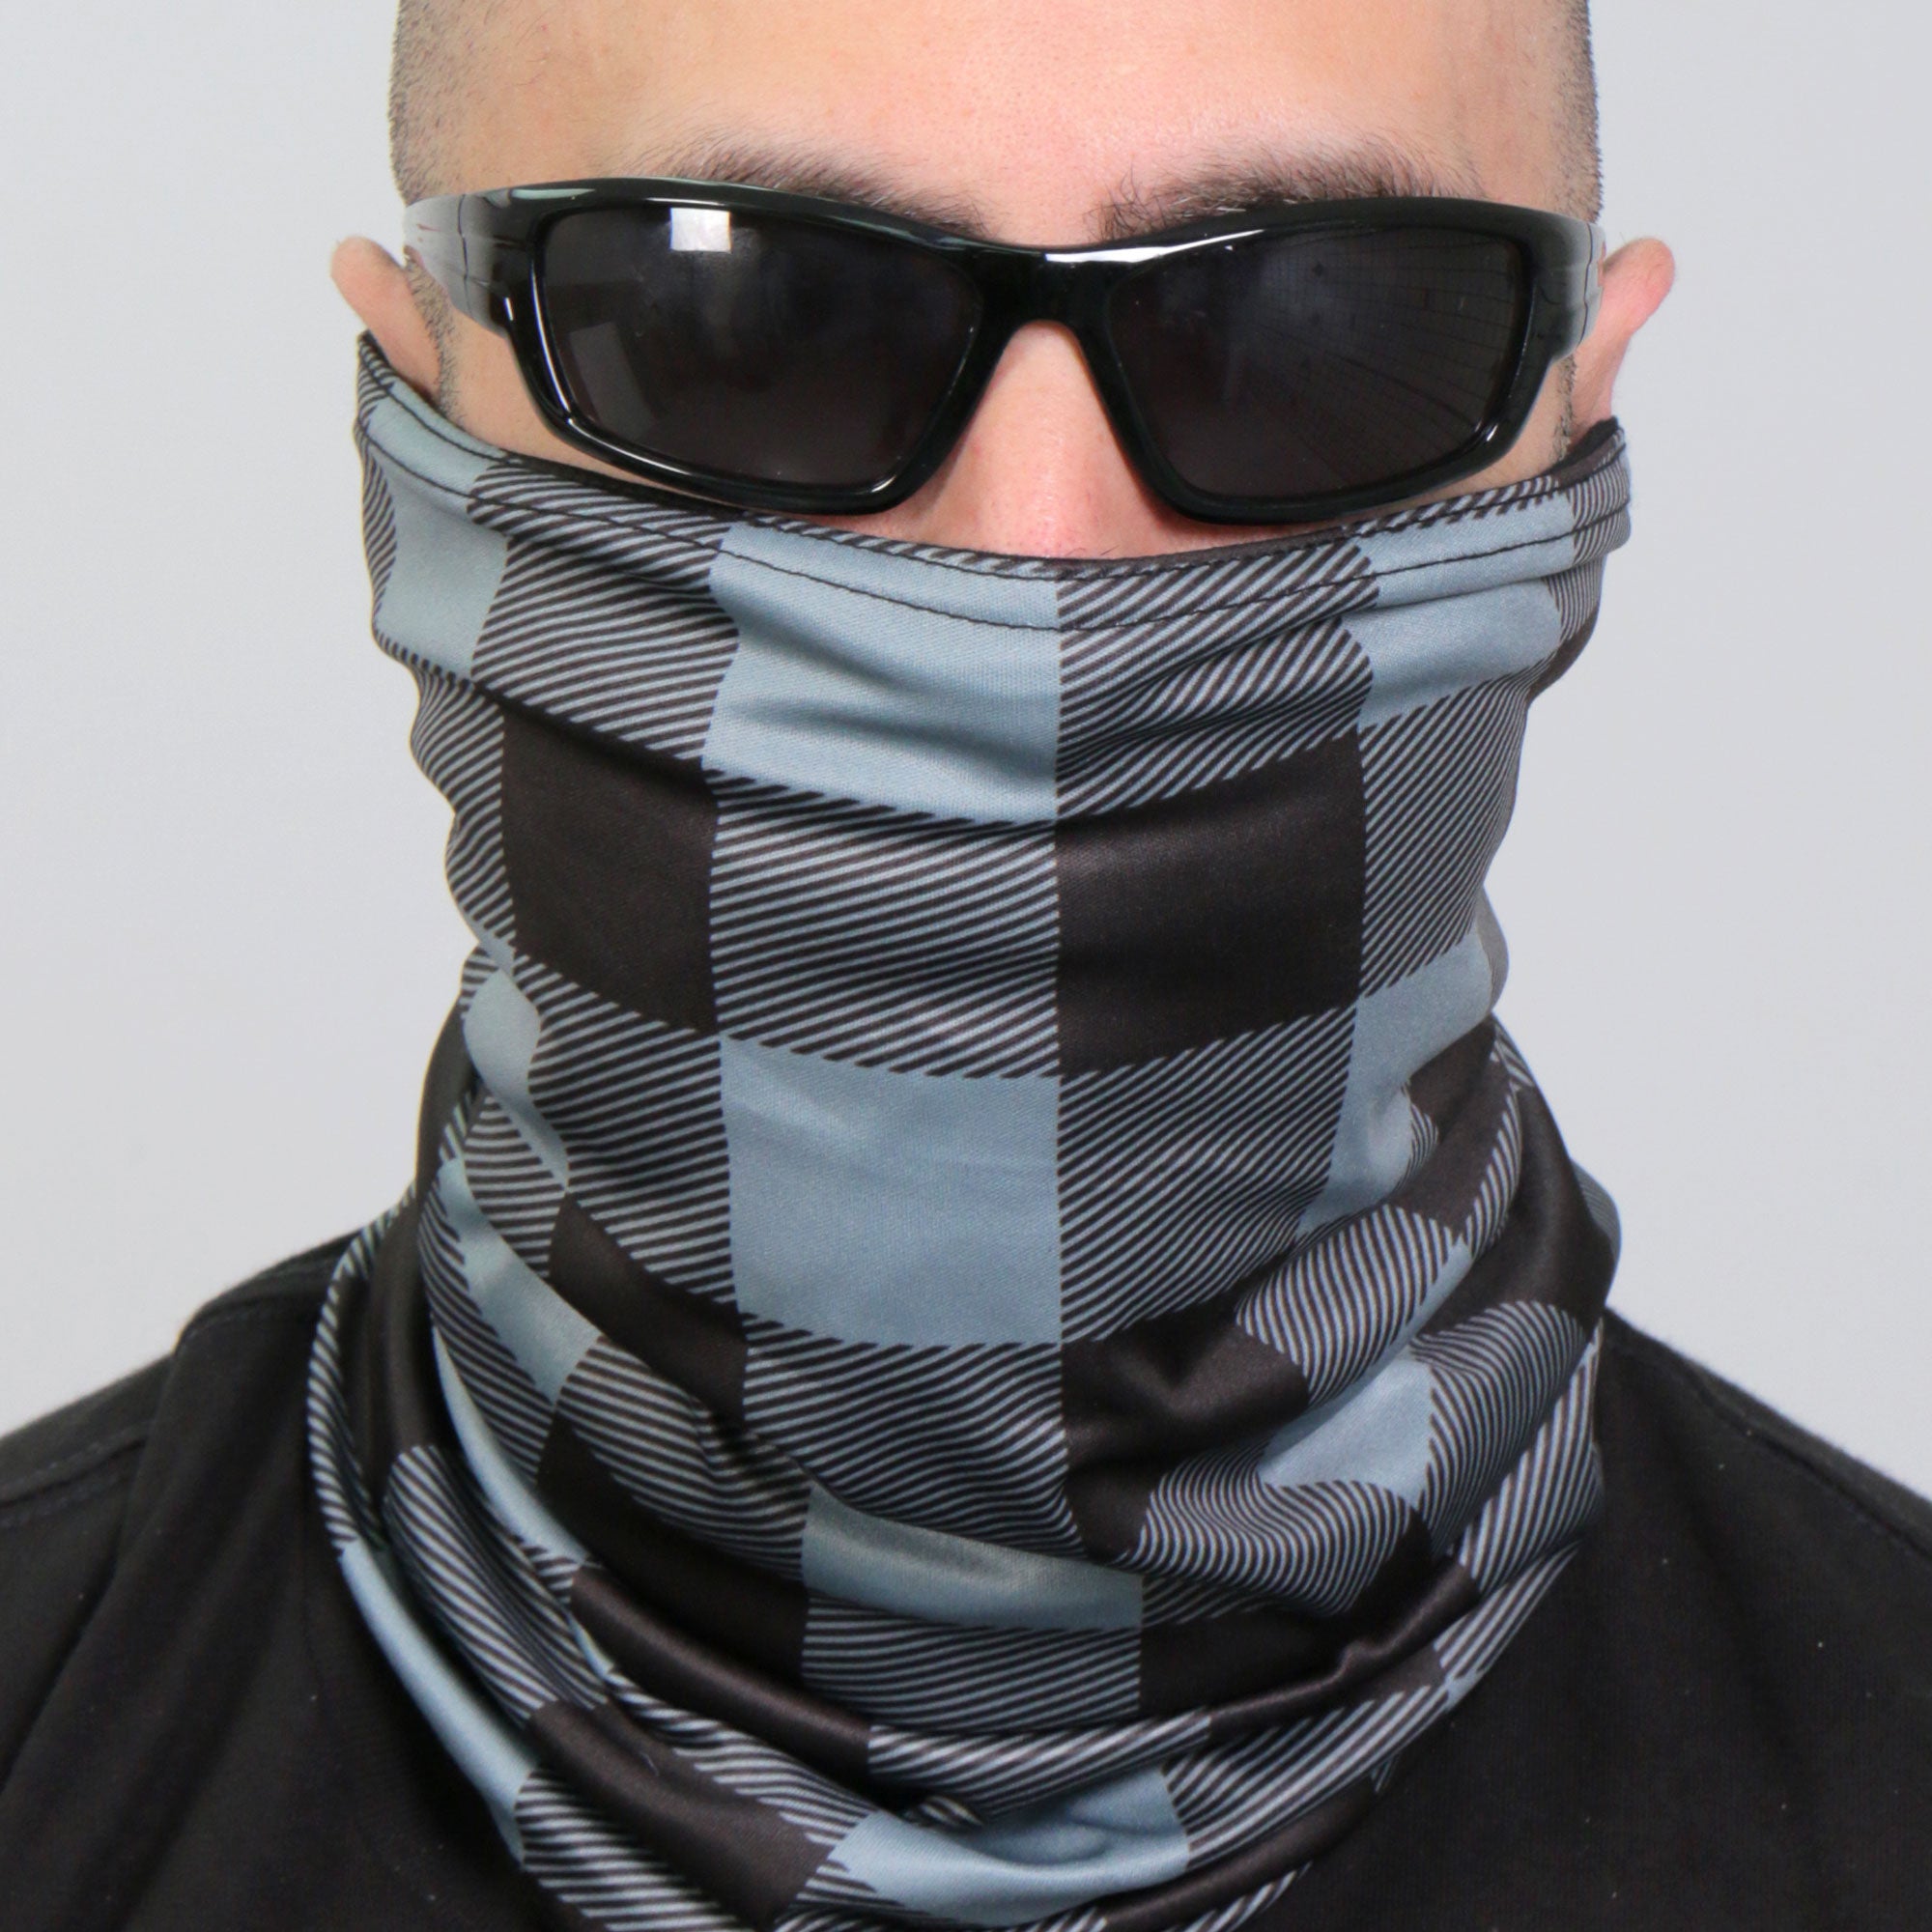 Hot Leathers HWN2021 Gray and Black Plaid Neck Gaiter